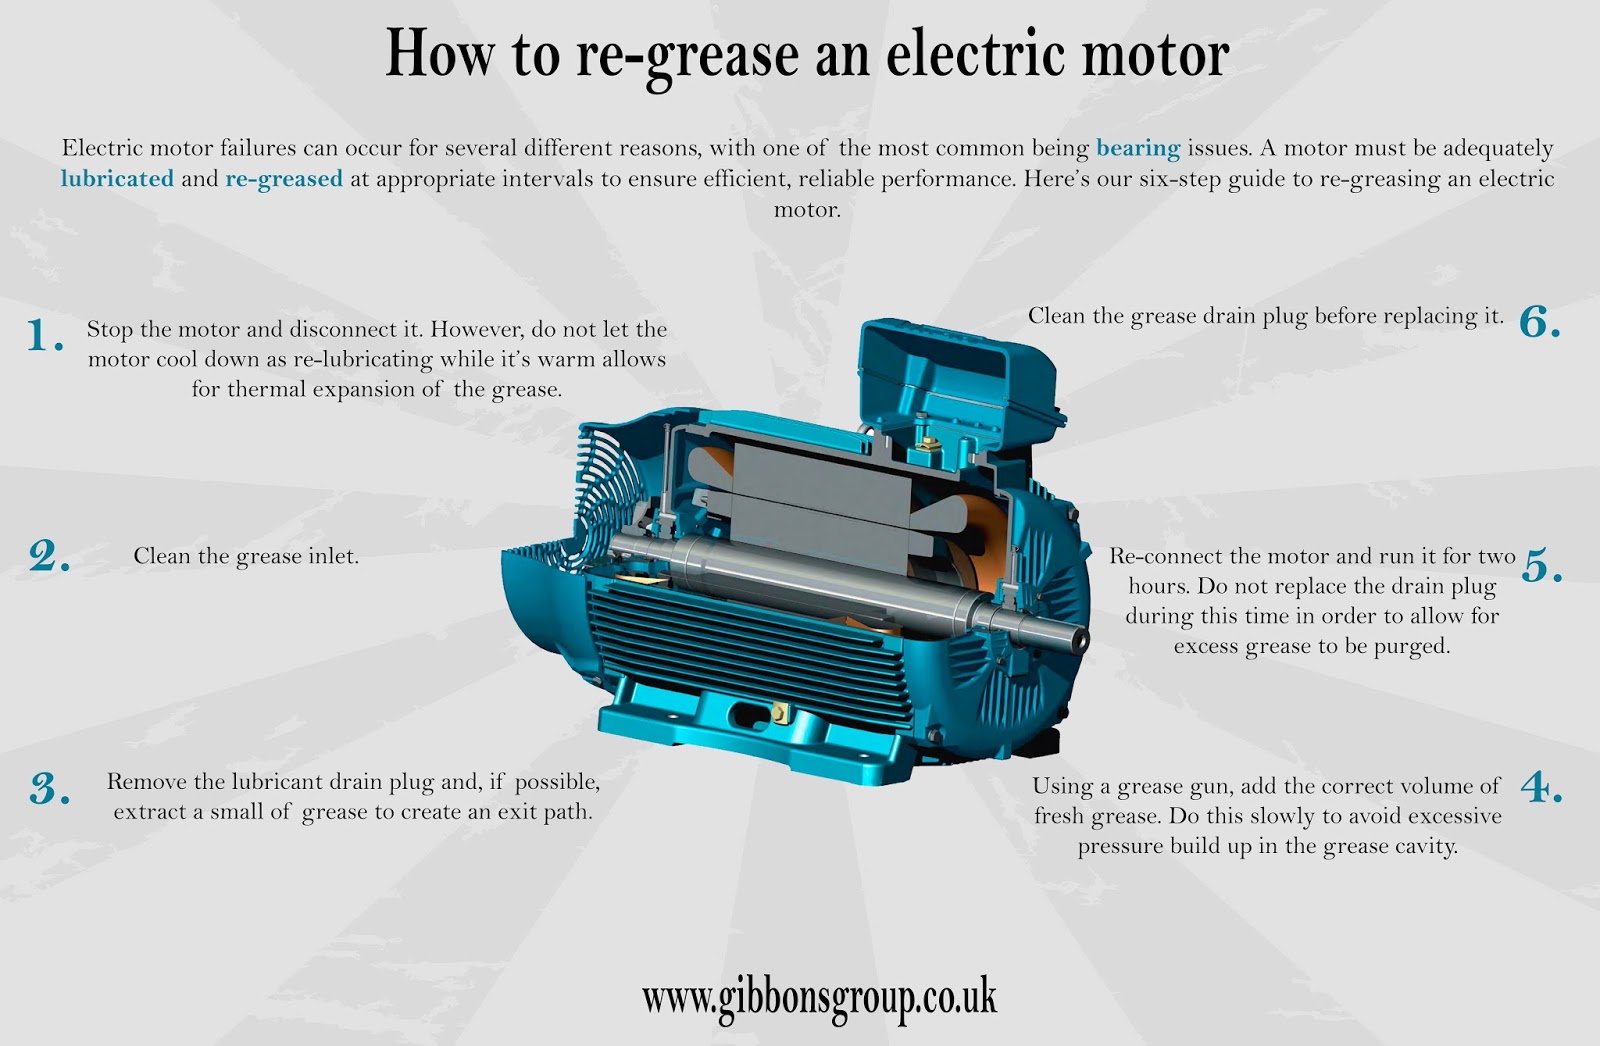 How to re-grease an electric motor - The Gibbons Group